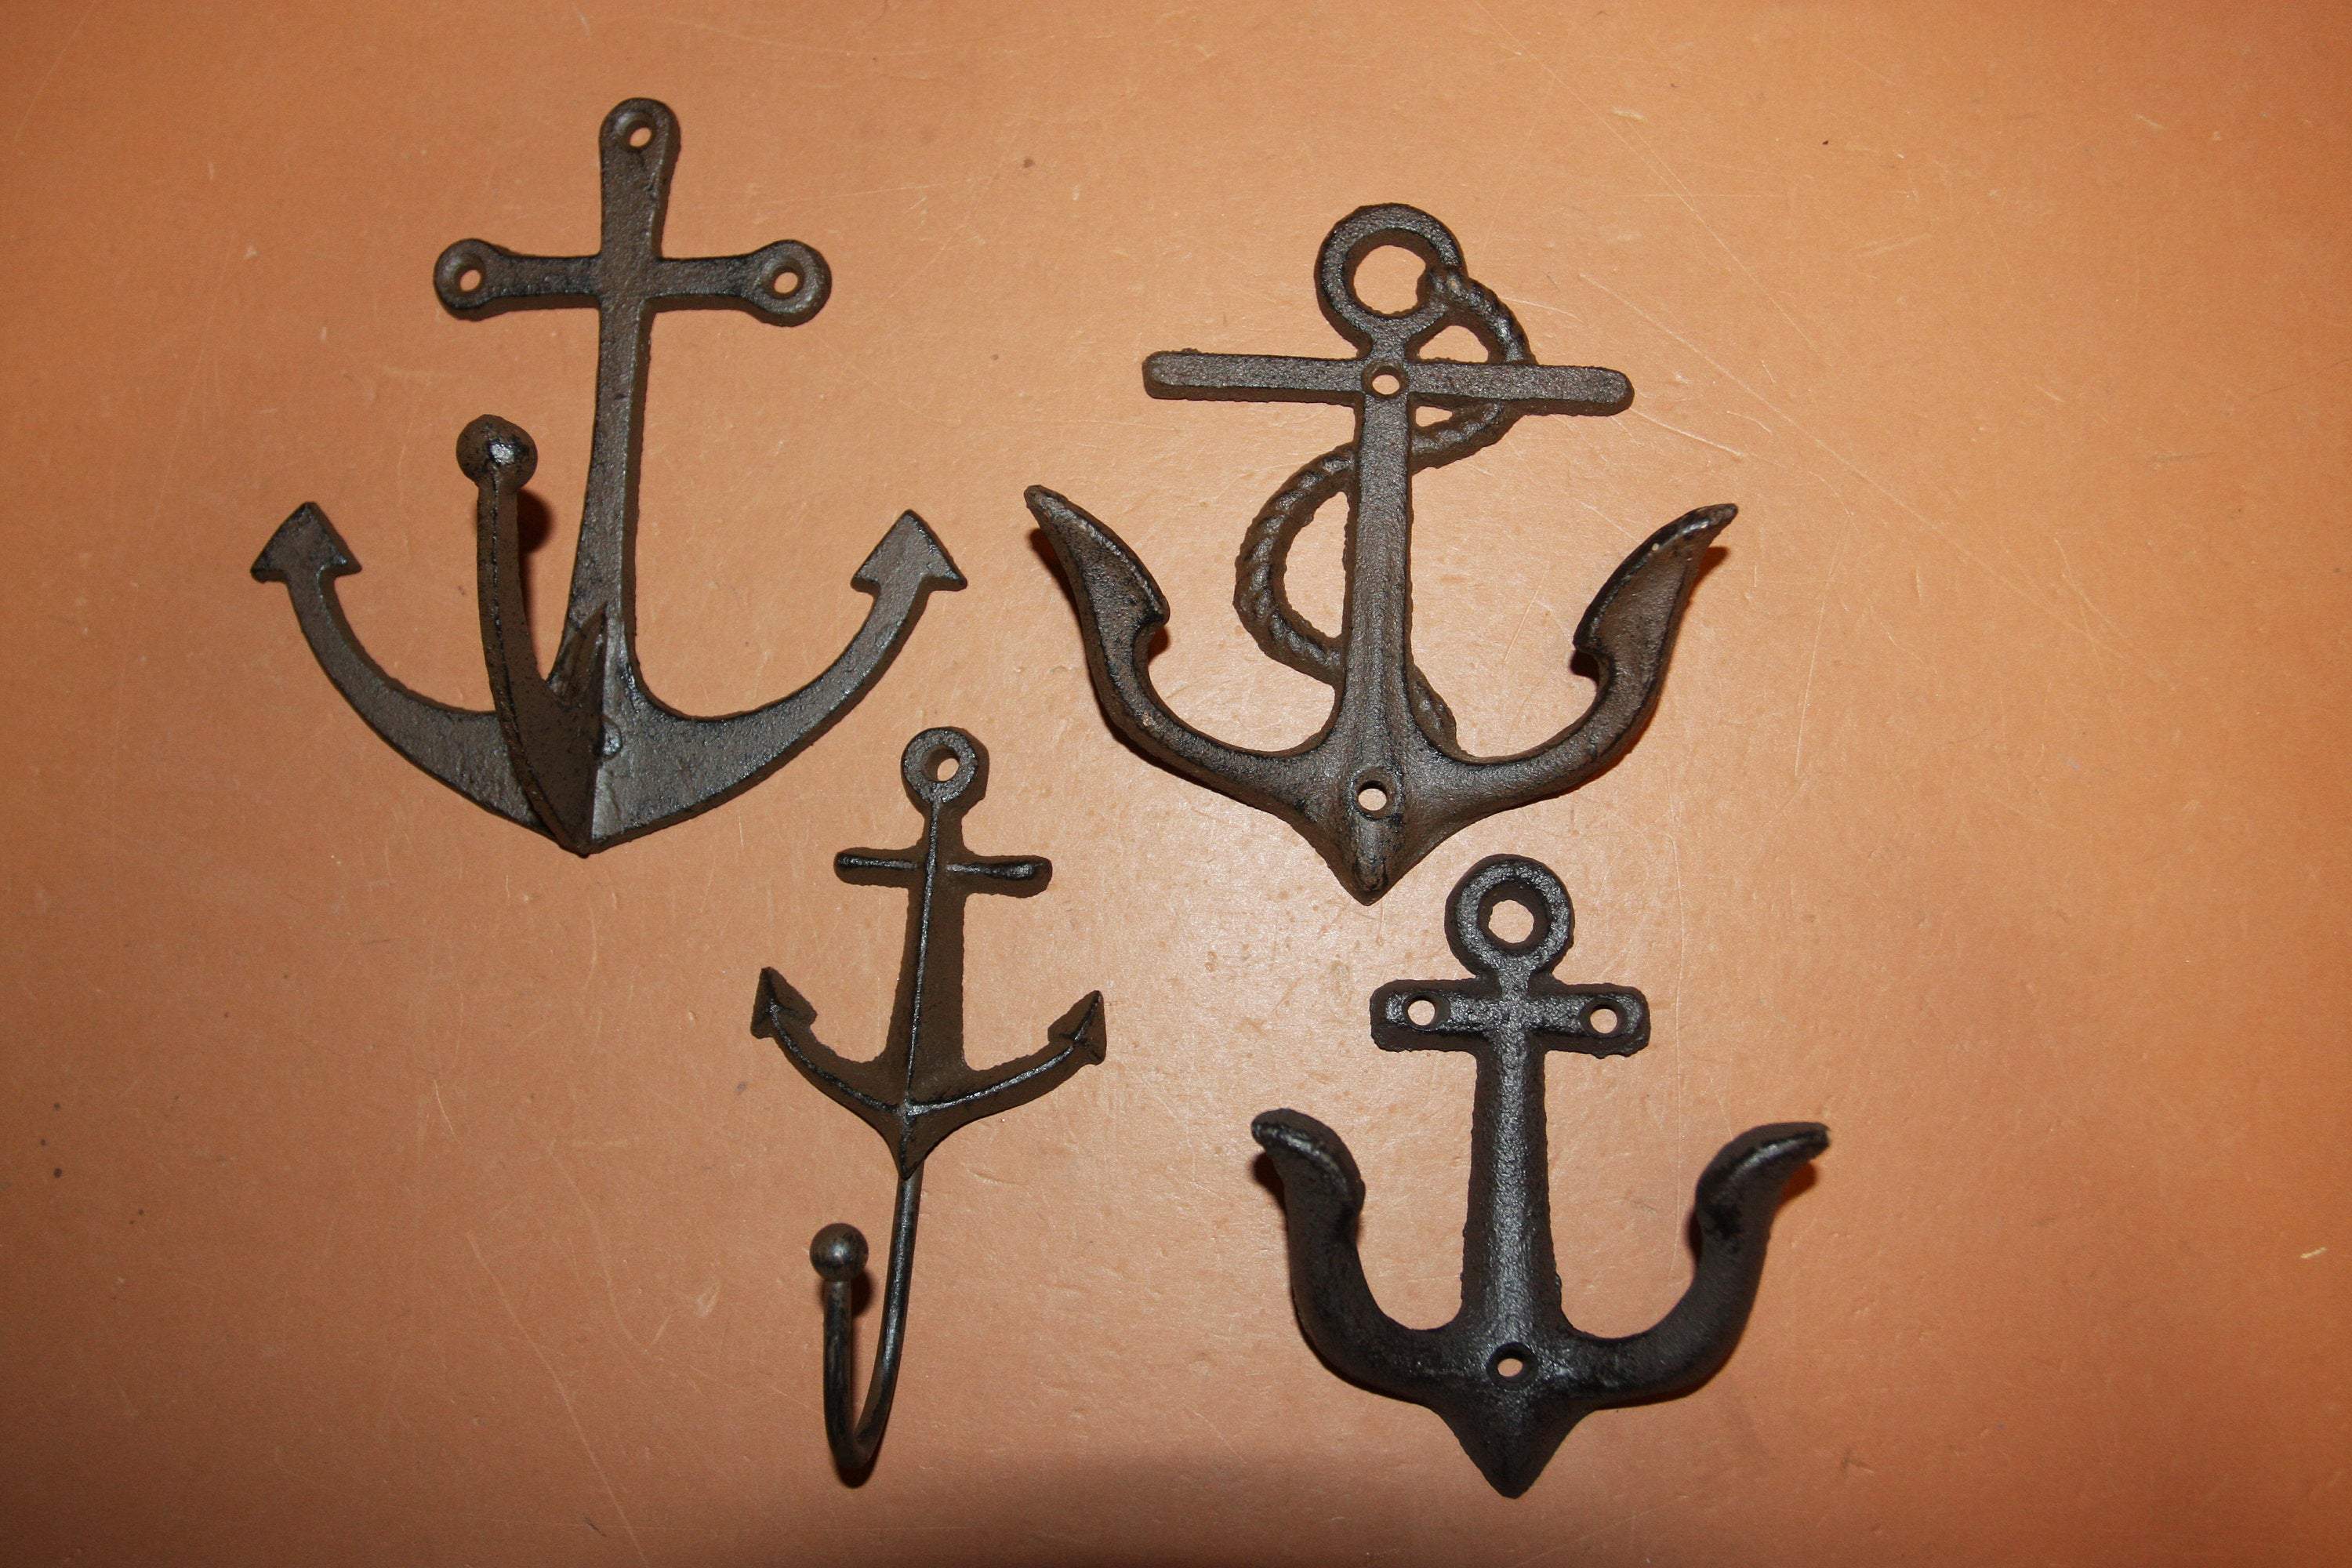 4) Sailor Home Decor Rustic Anchor Wall Hooks, Coats Hats Jackets Wall Mounted Hooks, Shipping Included